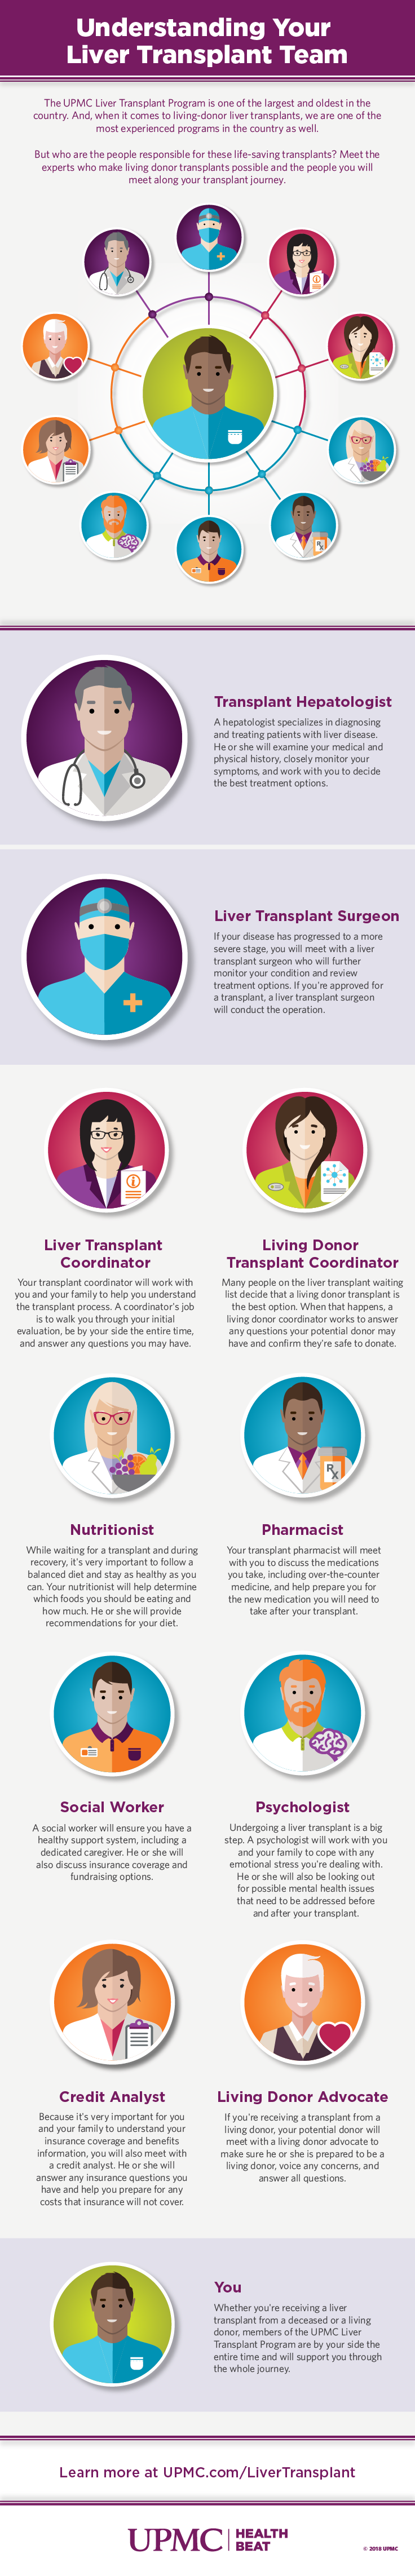 Meet the members of your liver transplant tea